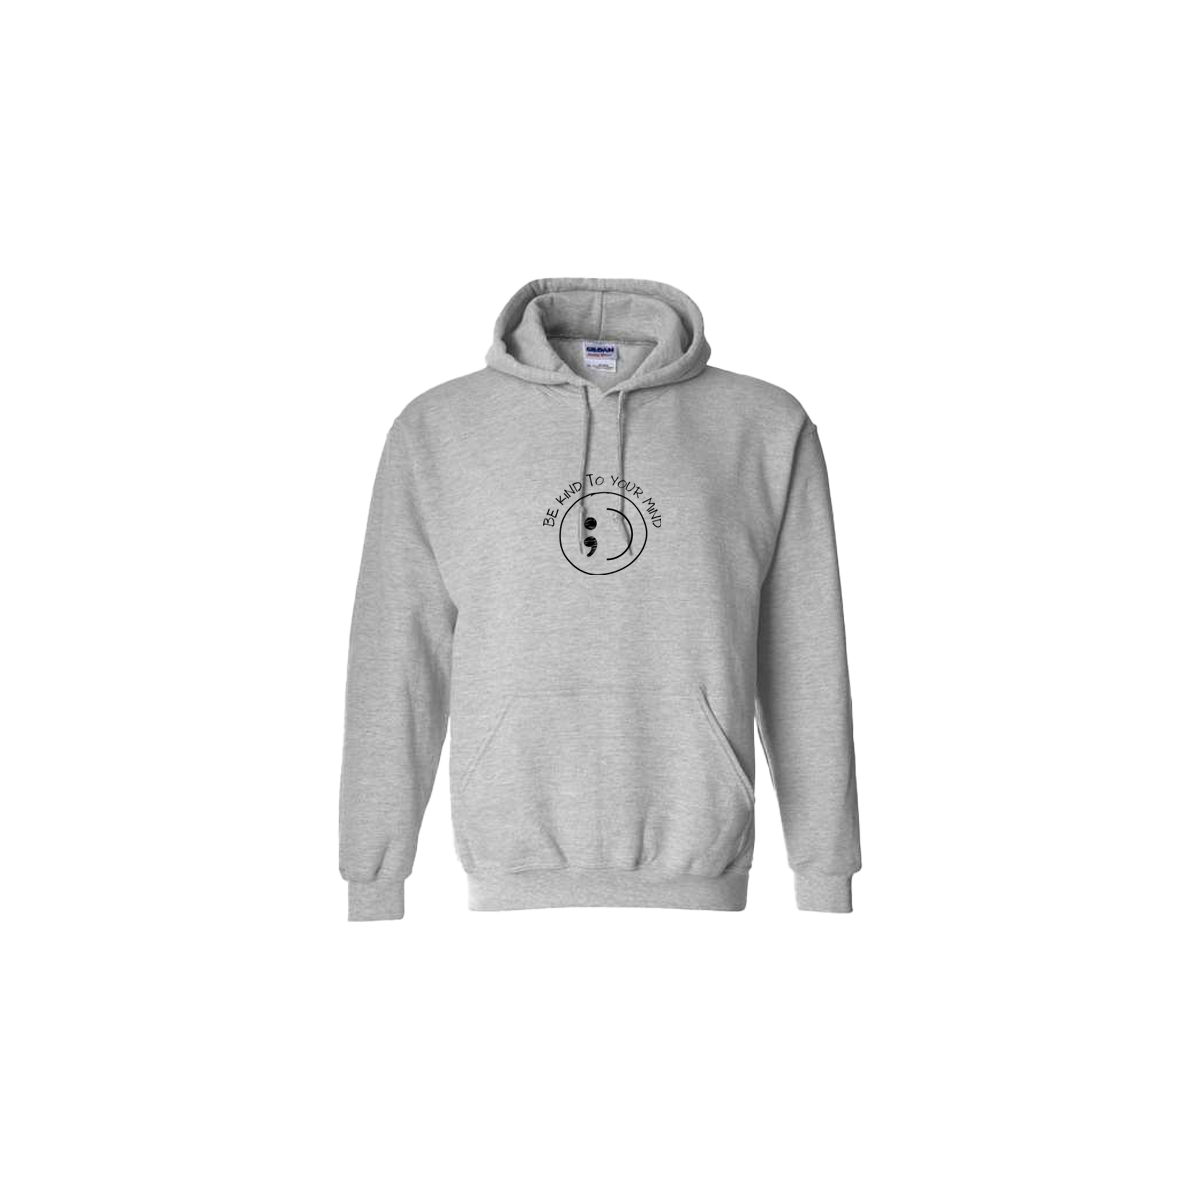 Be Kind To Your Mind Smiley Face Embroidered Grey Hoodie - Mental Health Awareness Clothing